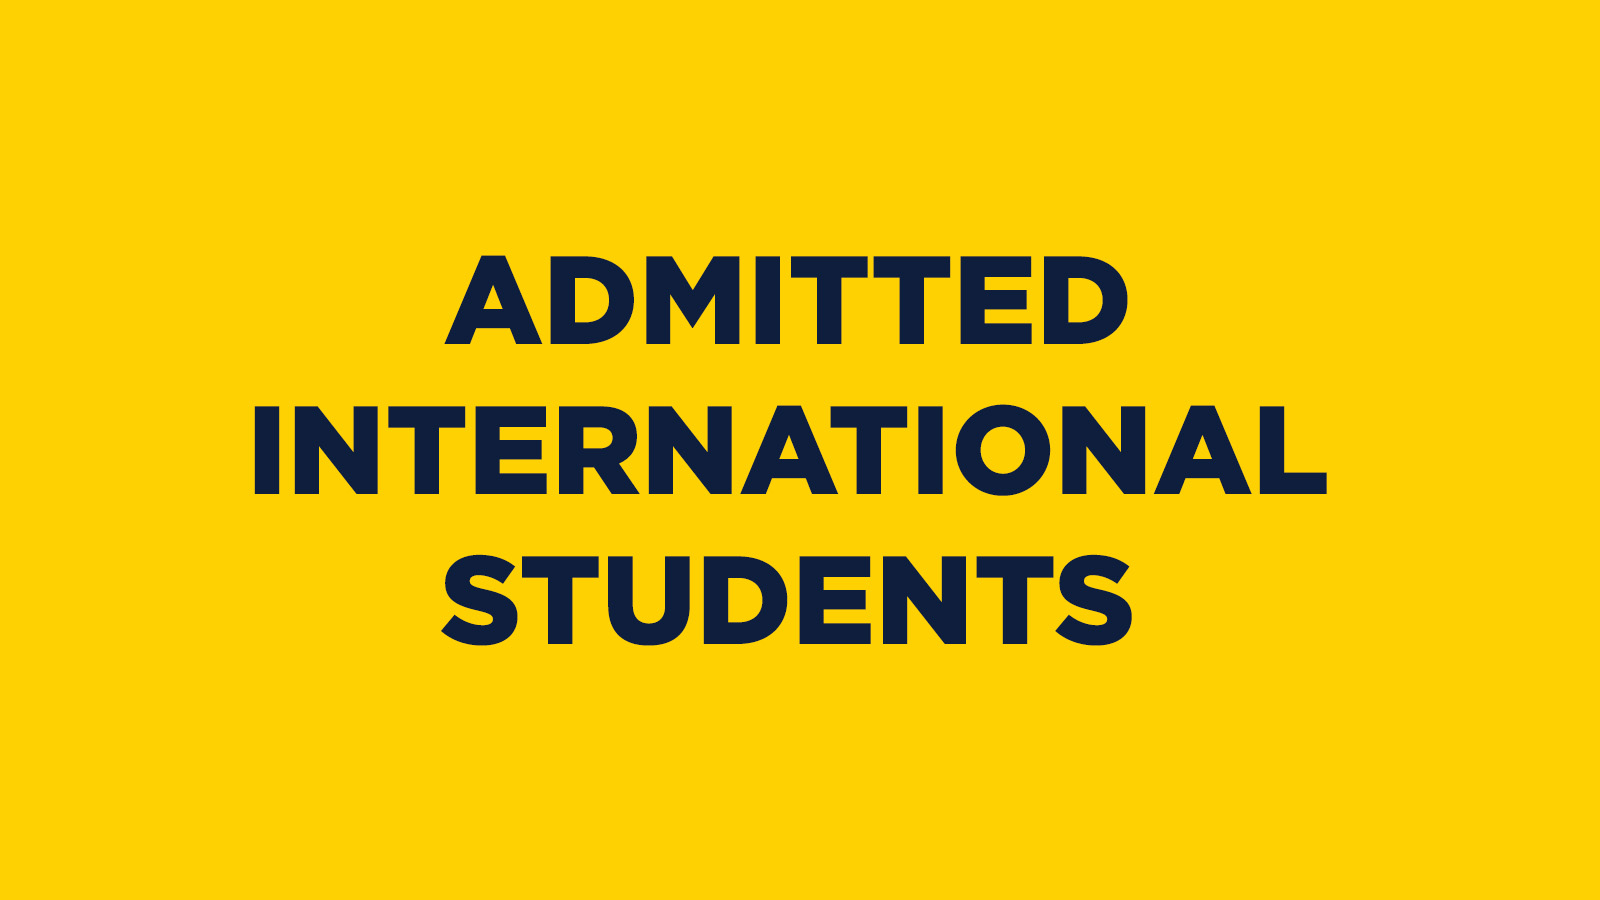 ADMITTED INTERNATIONAL STUDENTS